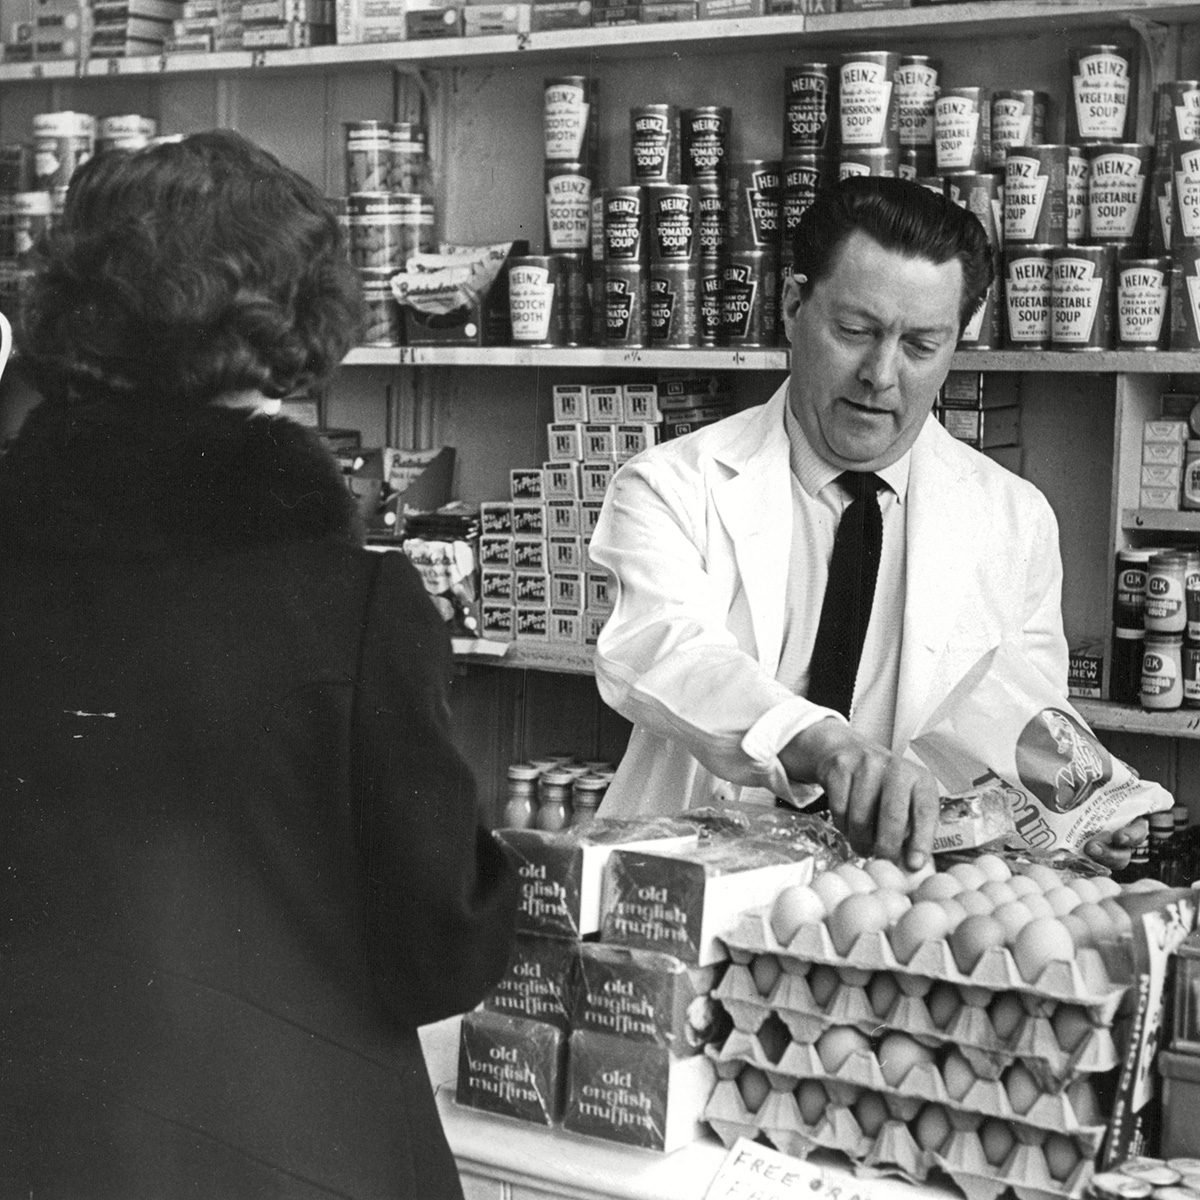 In His Shop Bev Martin Hands Out Groceries. In The Evening Martin Serves Pub Customers With Non-canned Music. Pub Entertainers Feature. Box 673 422031646 A.jpg. In His Shop Bev Martin Hands Out Groceries. In The Evening Martin Serves Pub Customers With Non-canned Music. Pub Entertainers Feature.